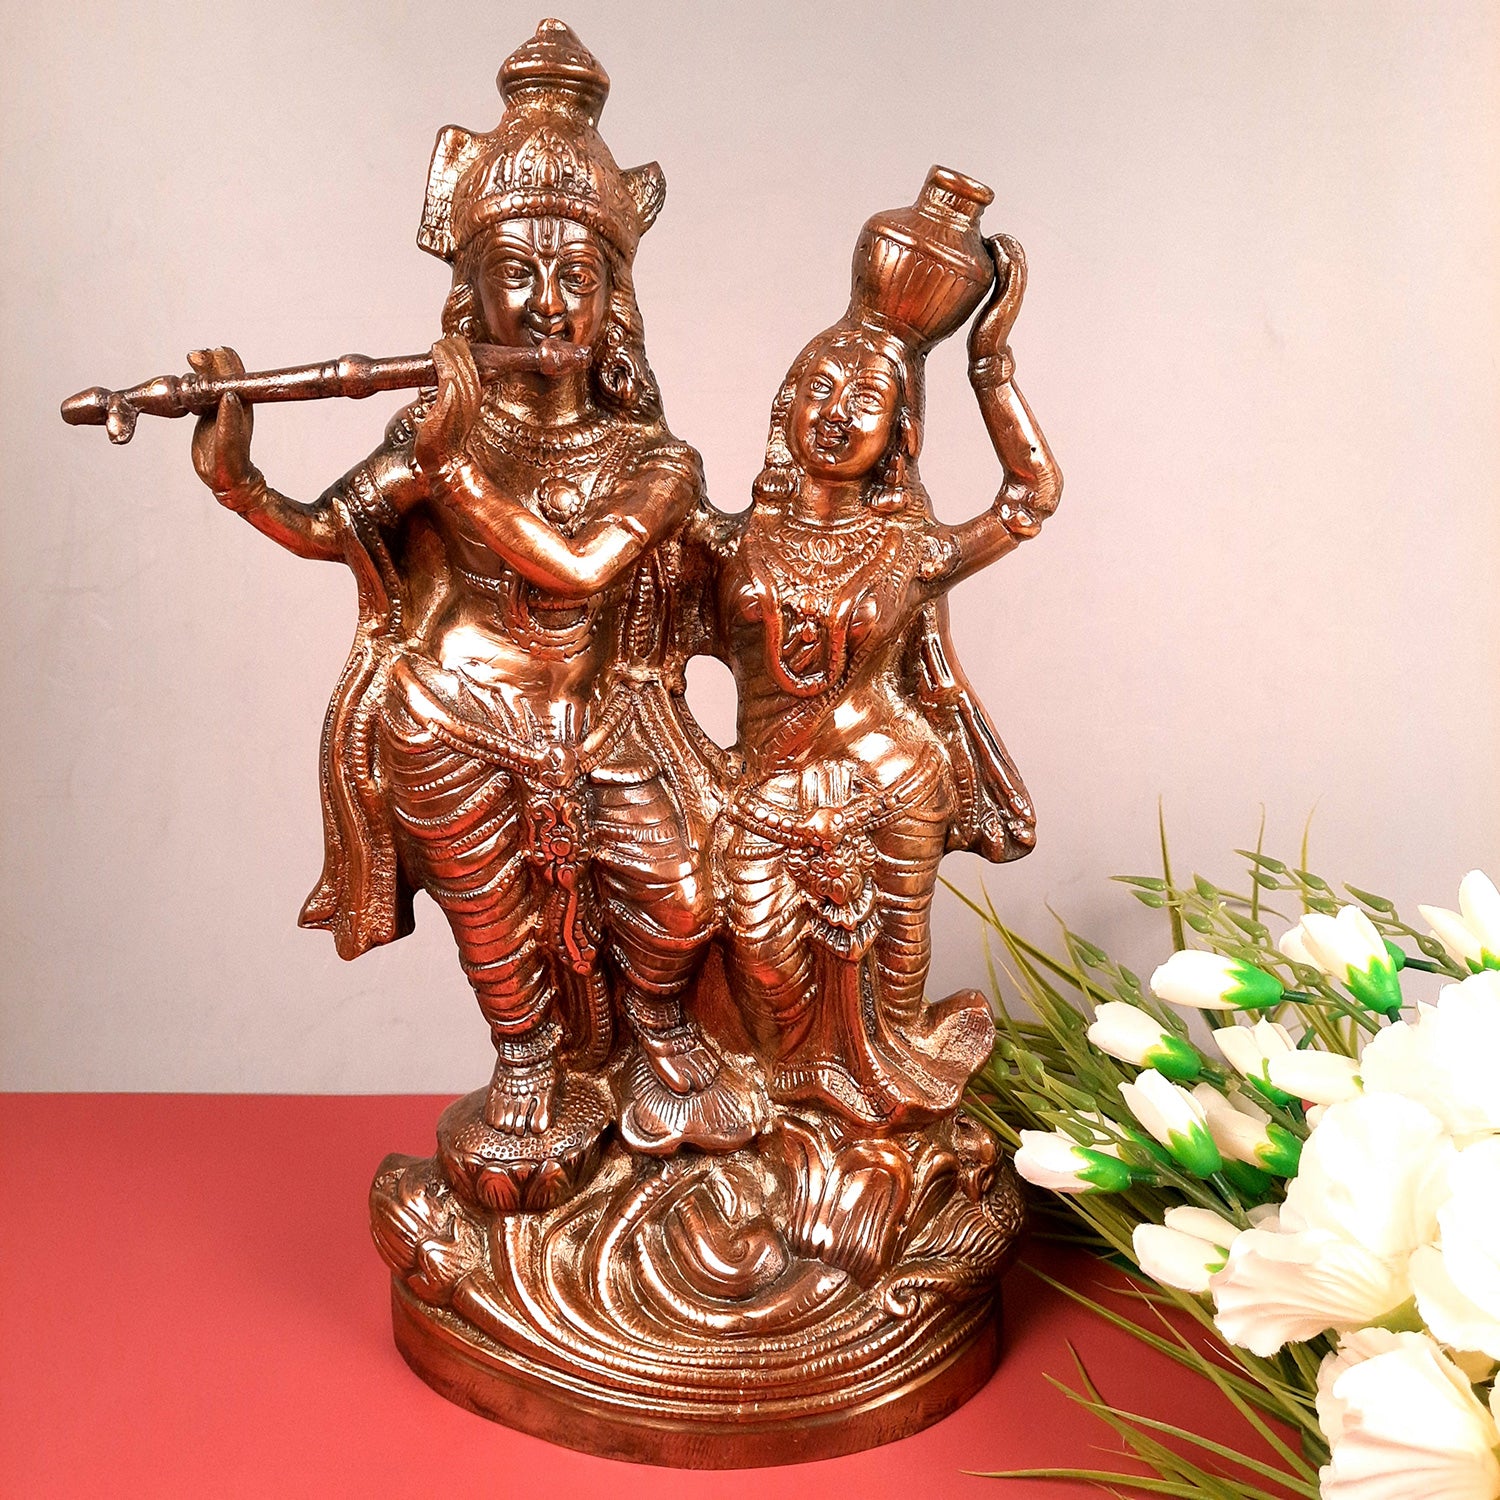 Radha Krishna Idol Statue | Radhe Krishna Murti For Corner Decoration | Wedding Gift for Couples | Religious Gift - for Home, Table, Living Room, Office, Puja , Entrance Decoration - 18 Inch - Apkamart